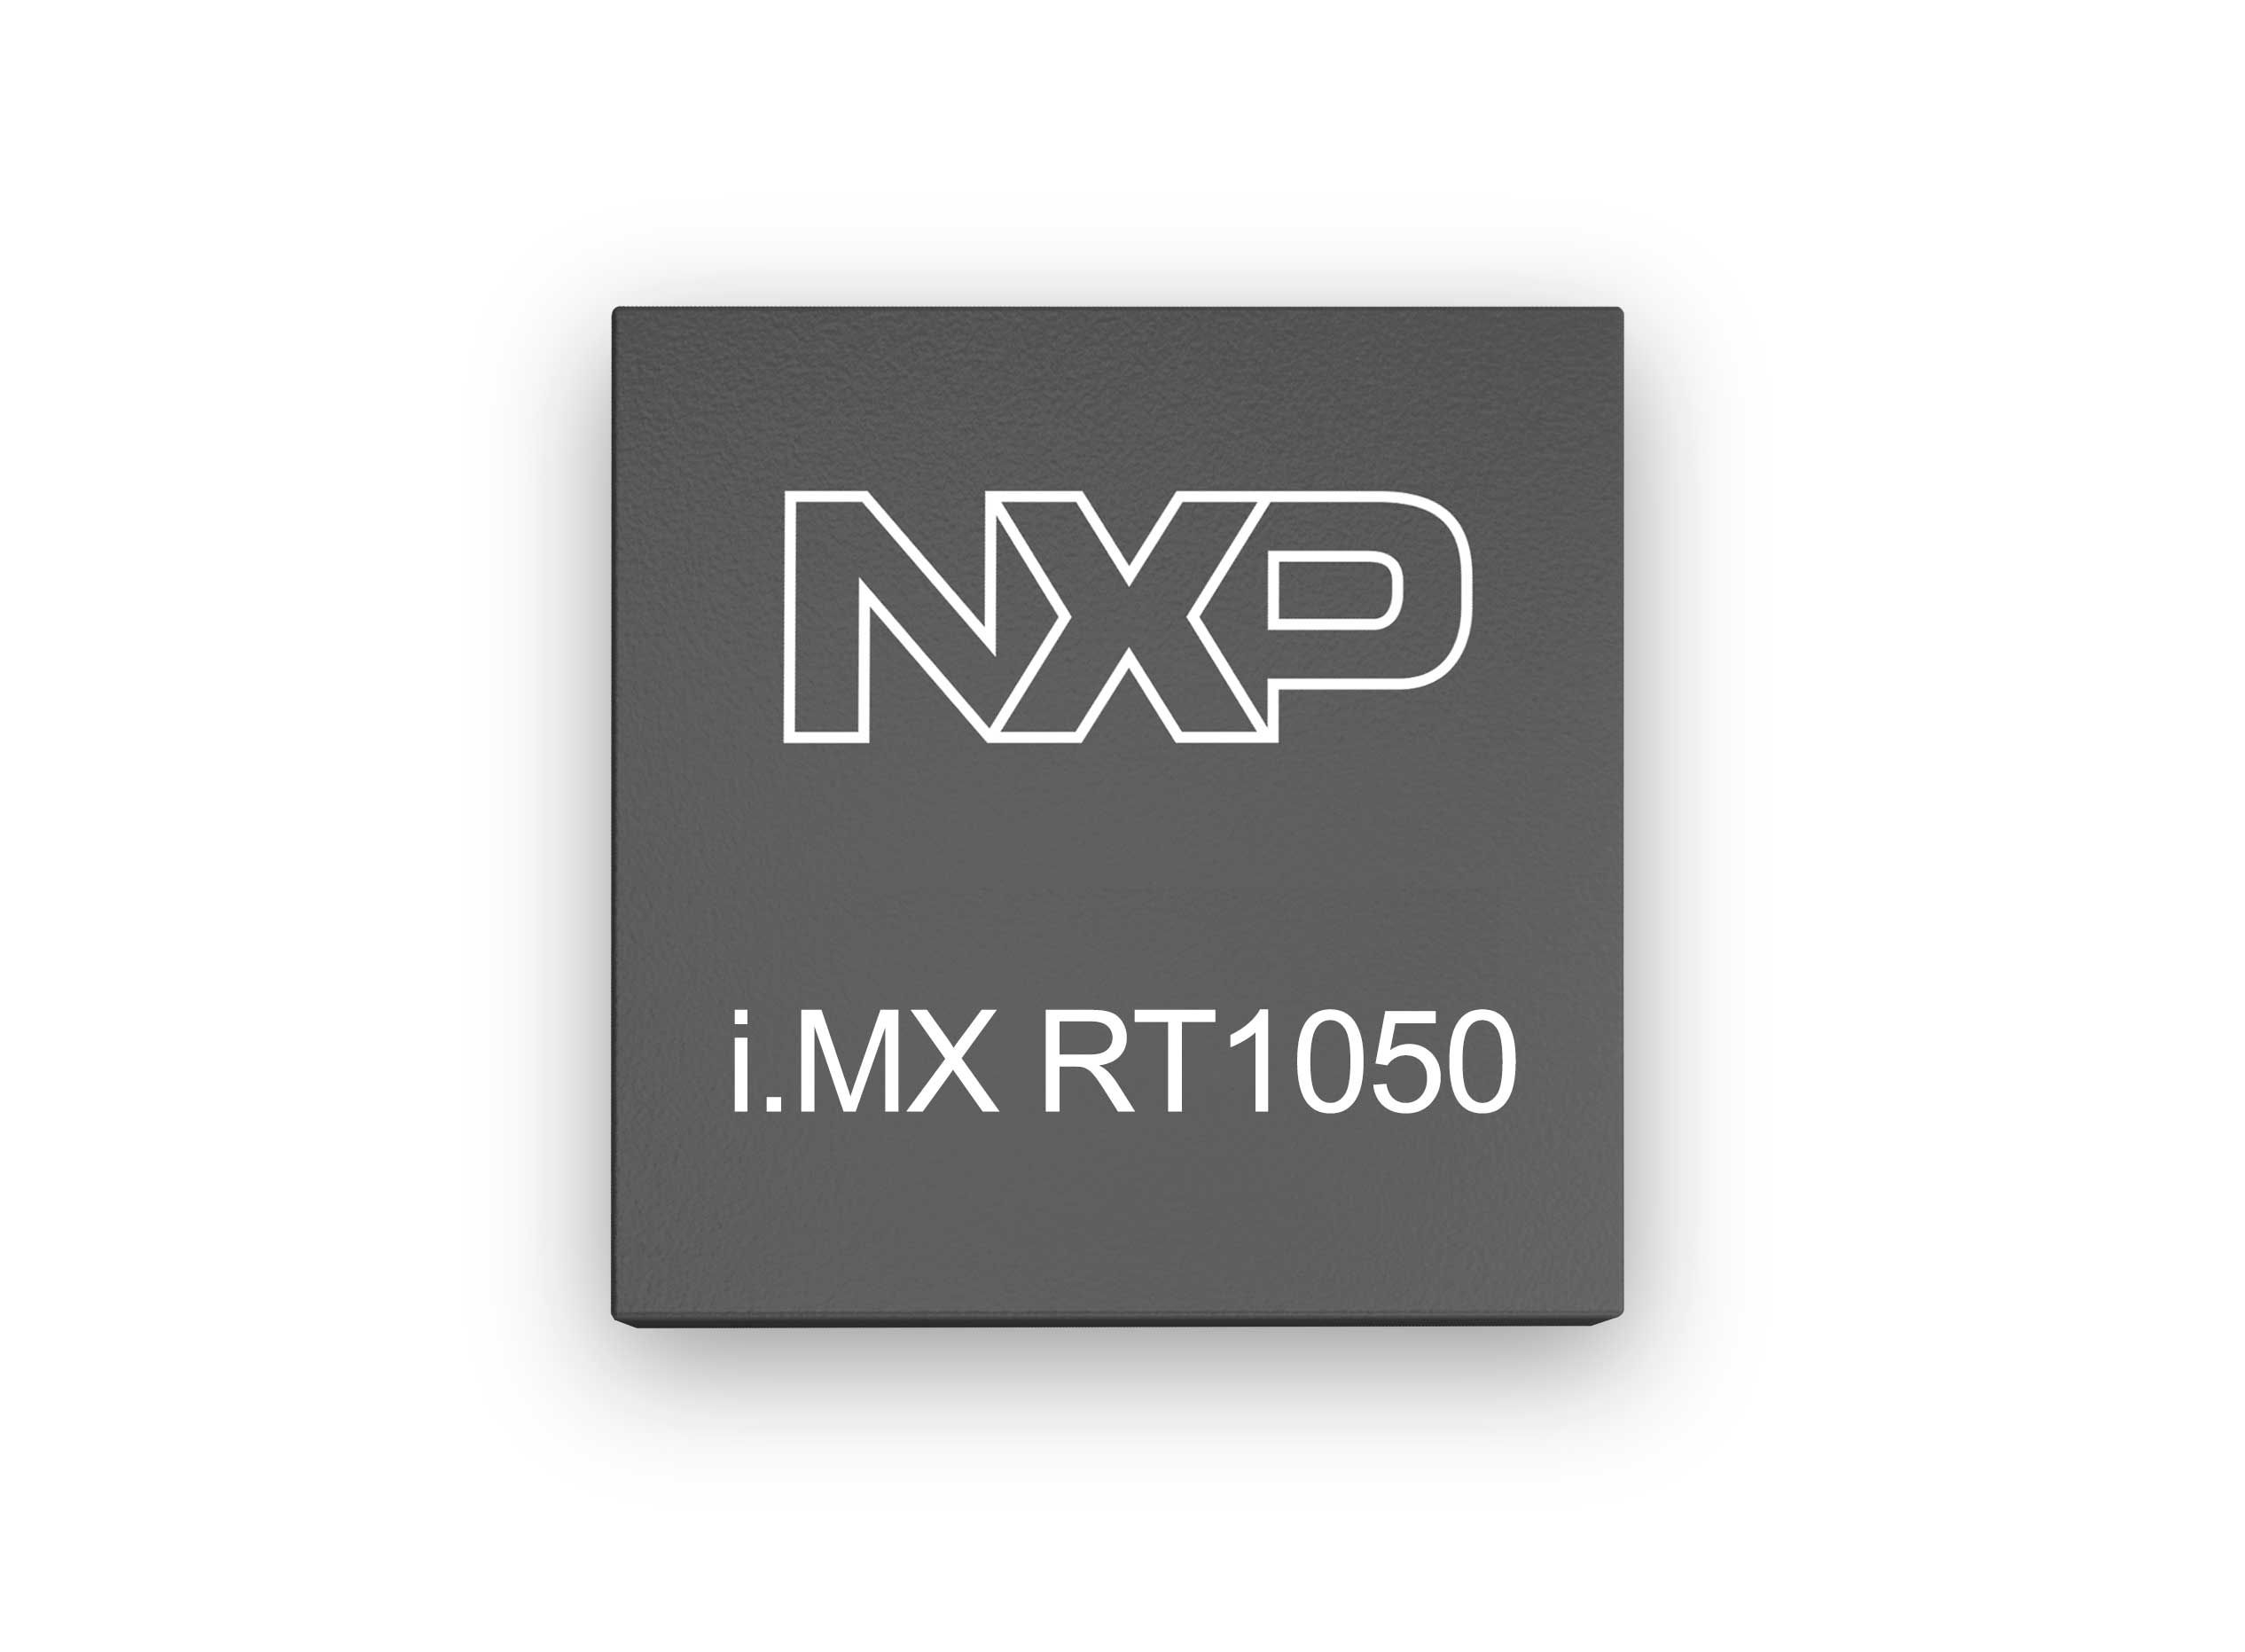 i.MX RT crossover MCU in MAPBGA package